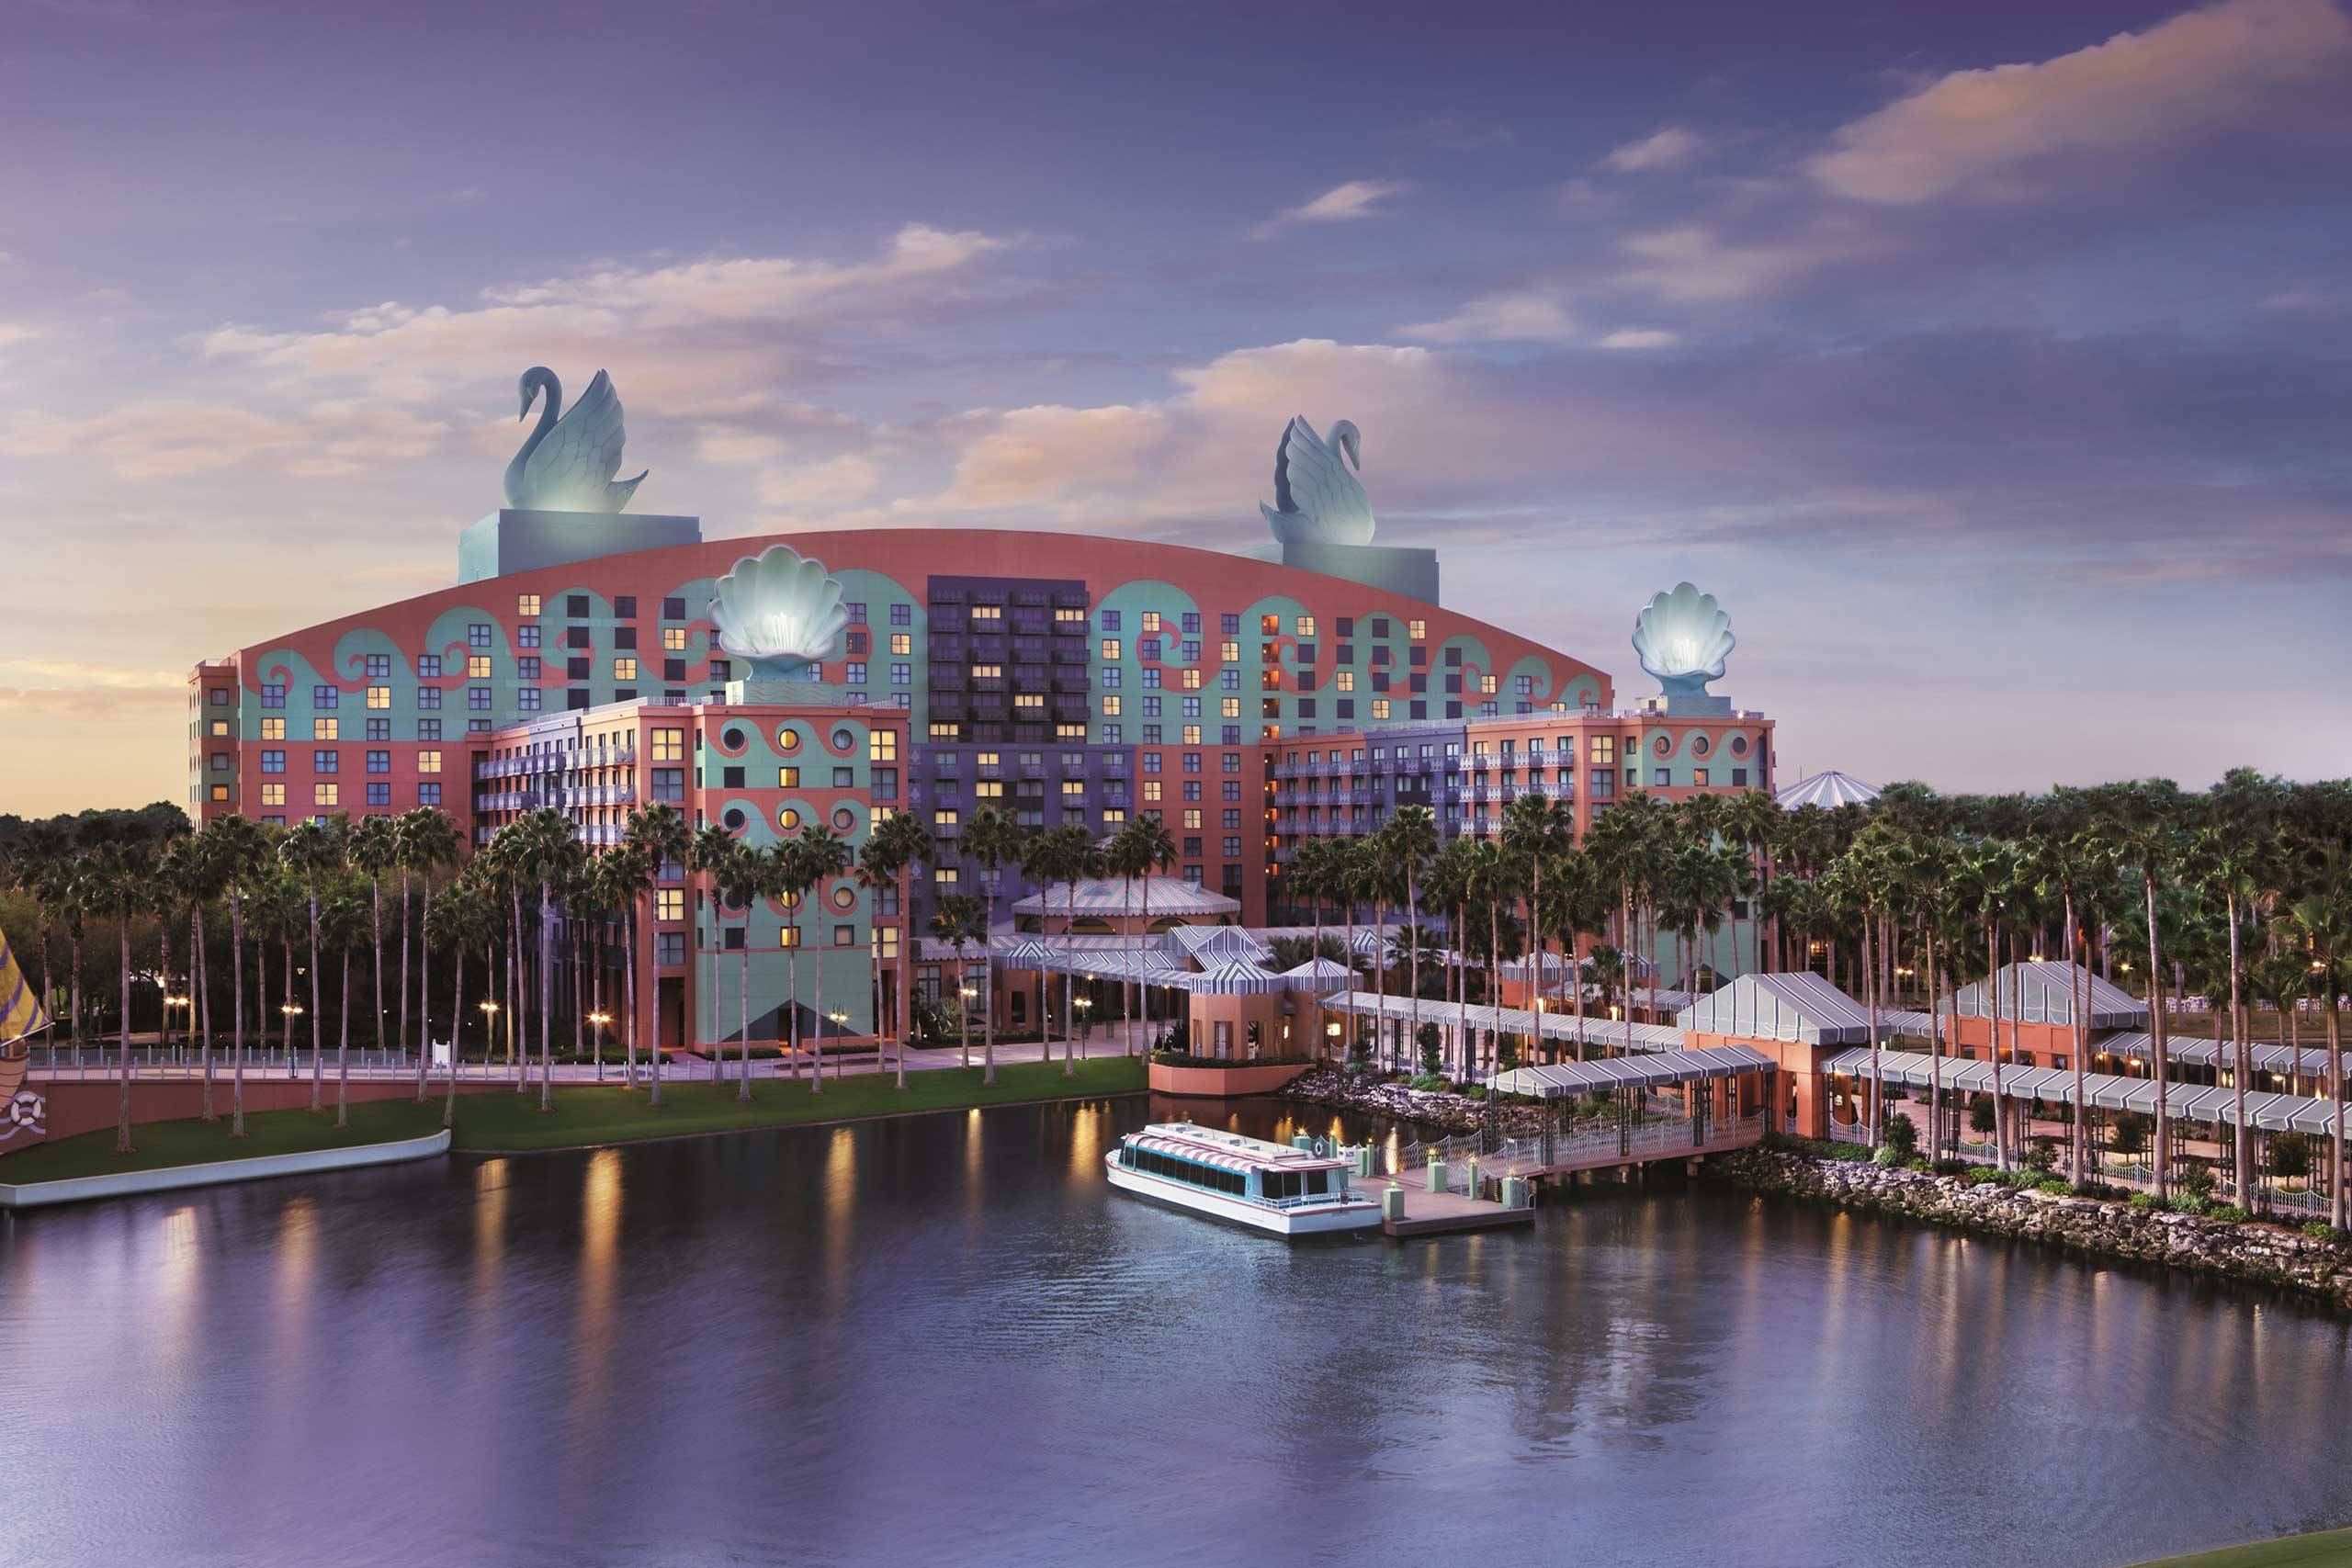 Walt Disney World Swan and Dolphin Resort confirms plans to build new tower